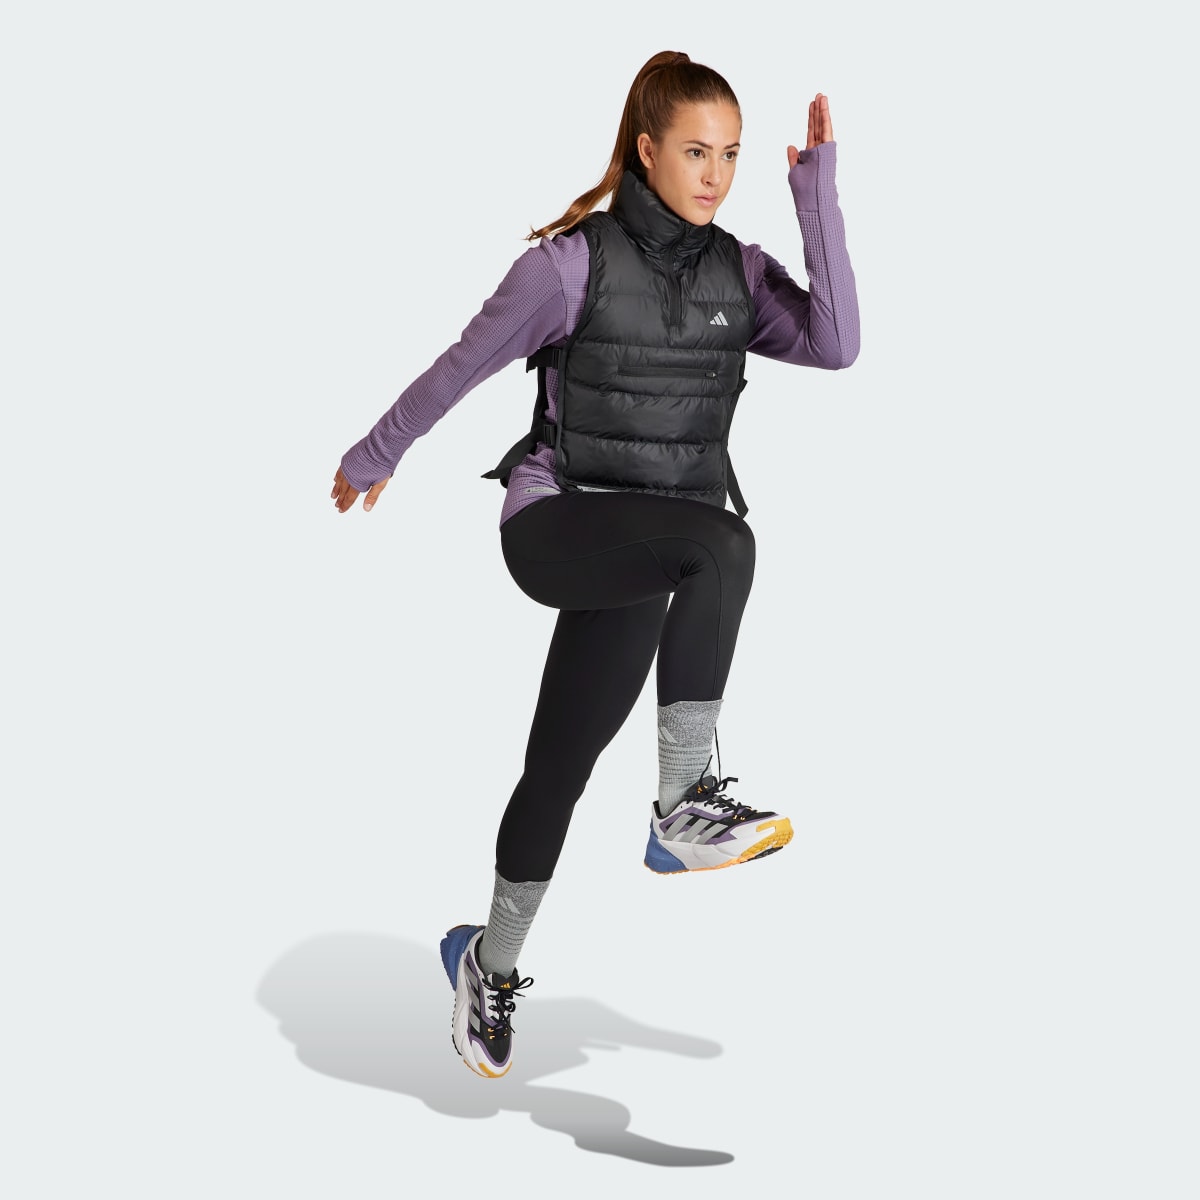 Adidas Ultimate Running Conquer the Elements Body Warmer Vest. 4